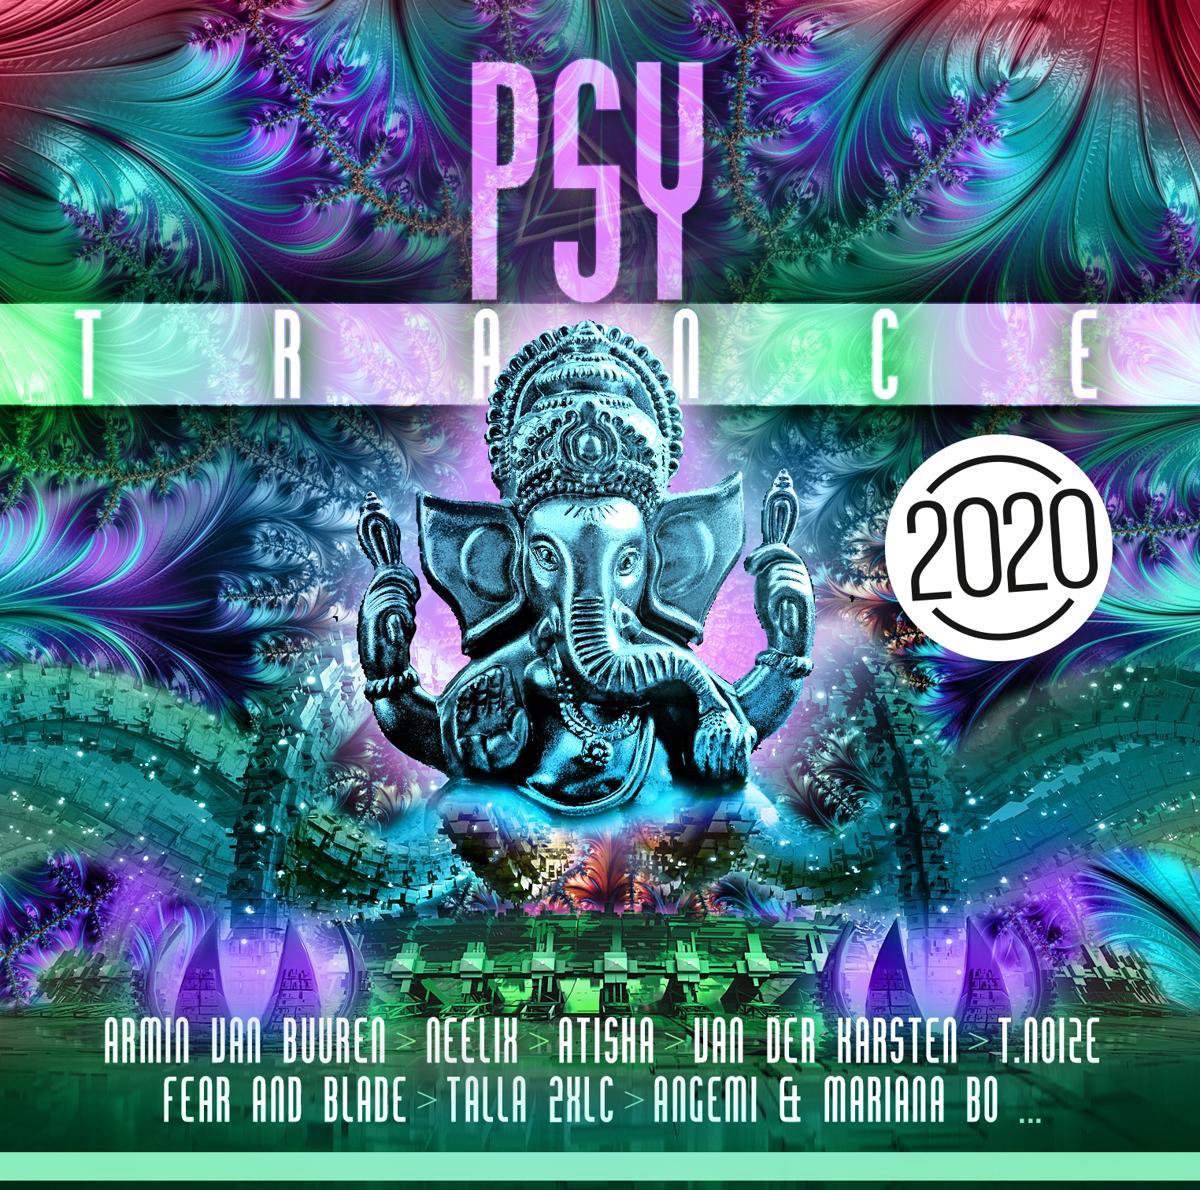 Psy Trance 2020 - various artists